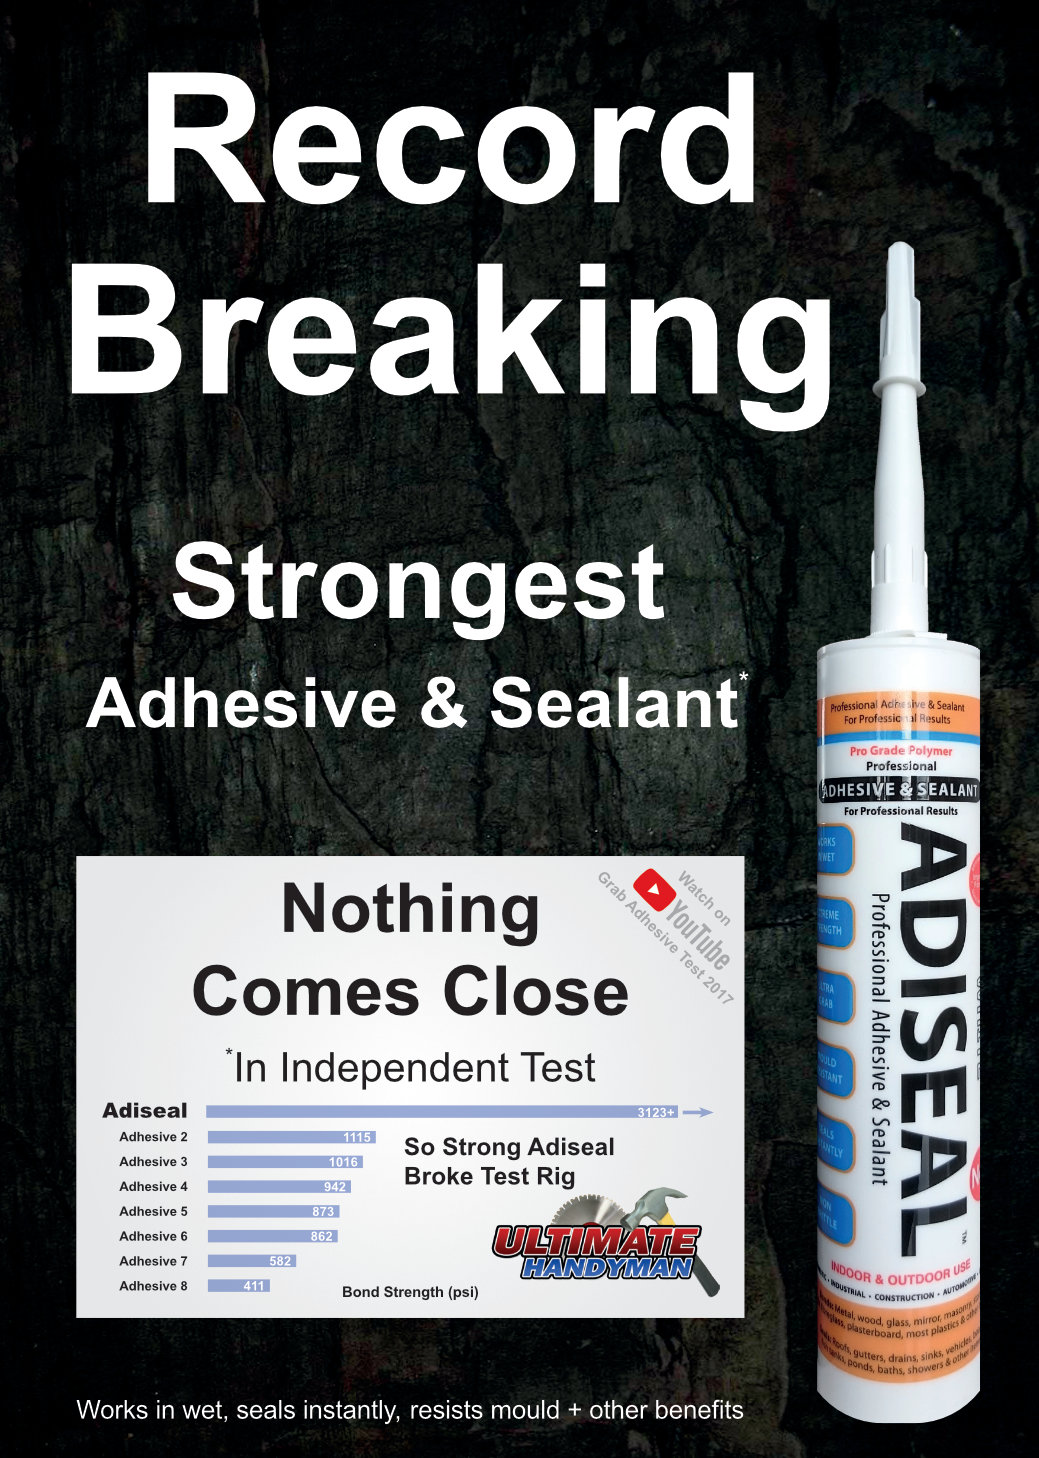 Record Breaking Strongest Adhesive & Sealant